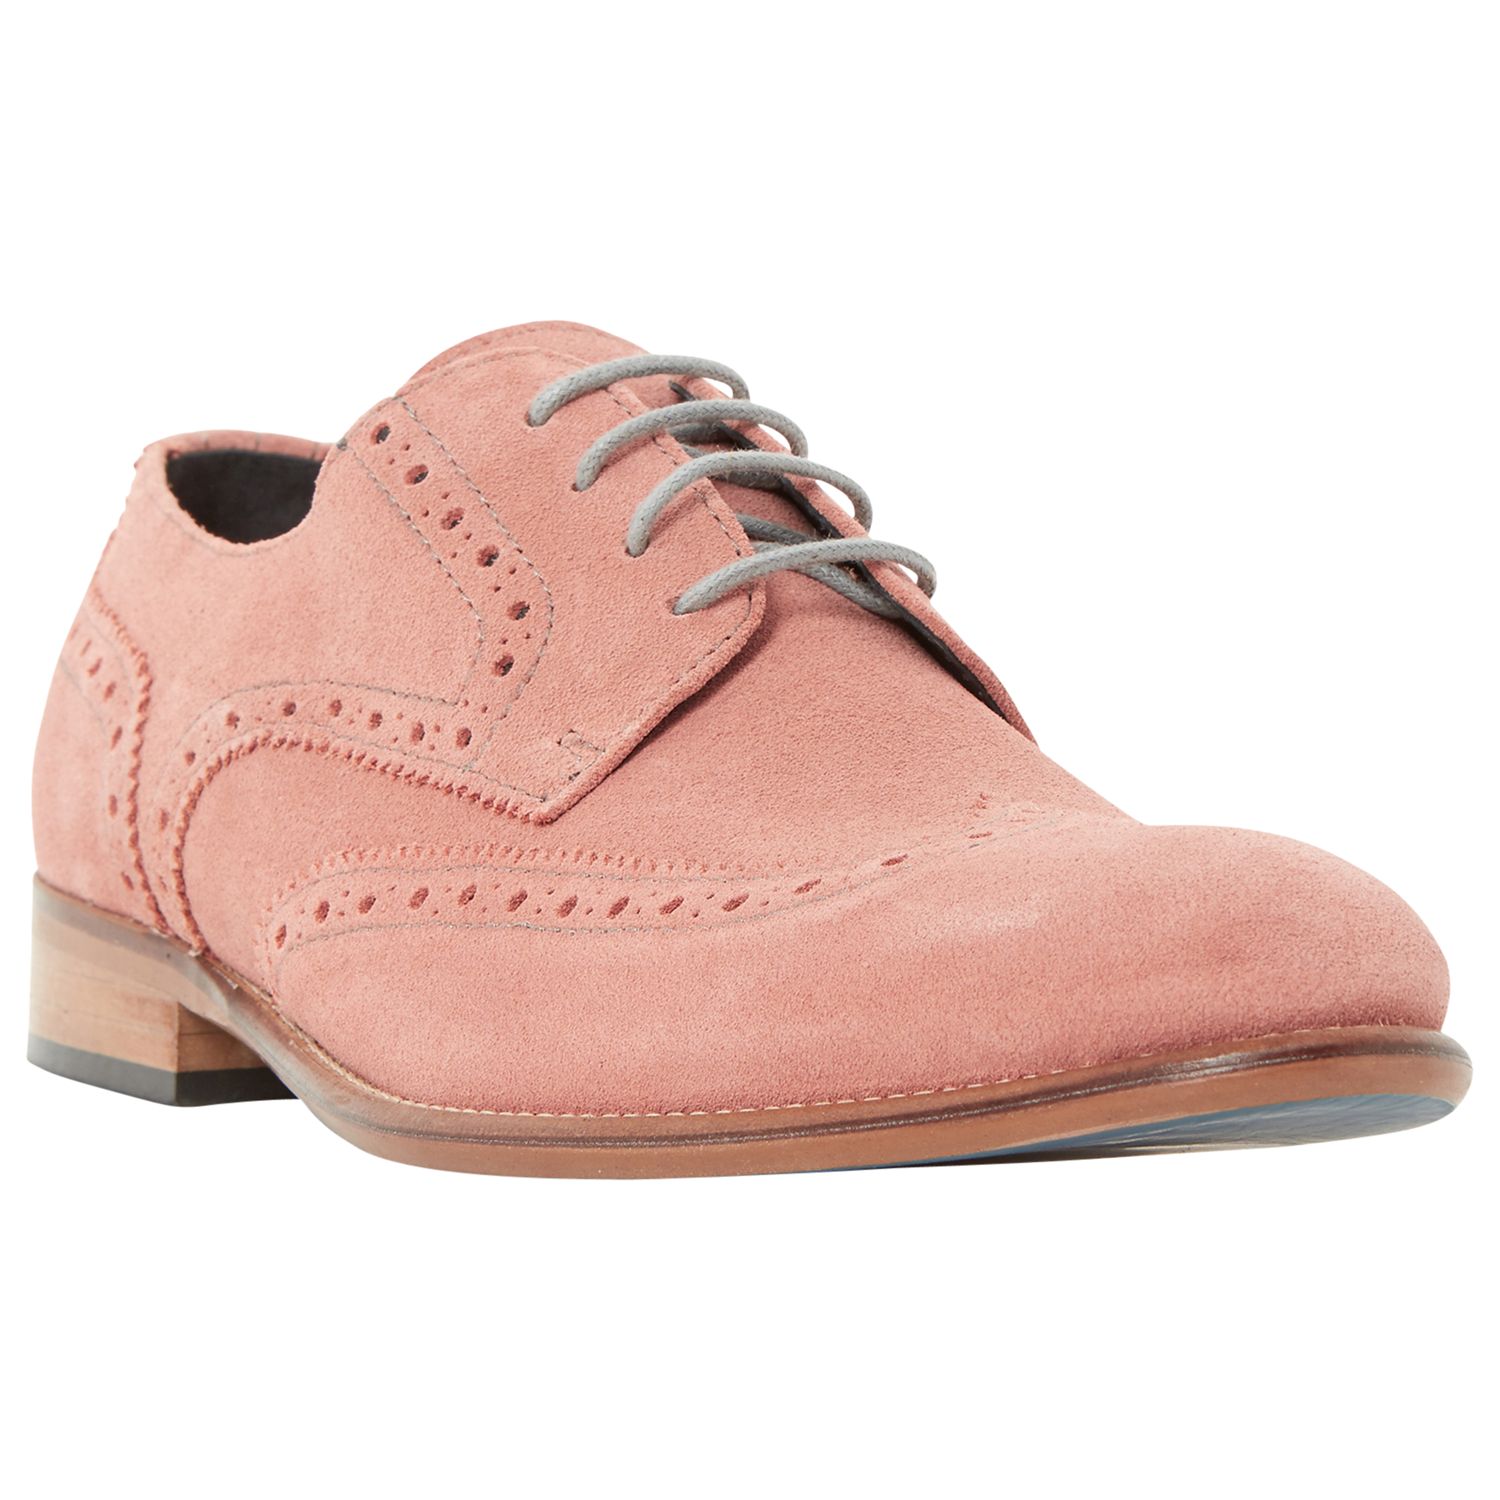 mens pink suede shoes